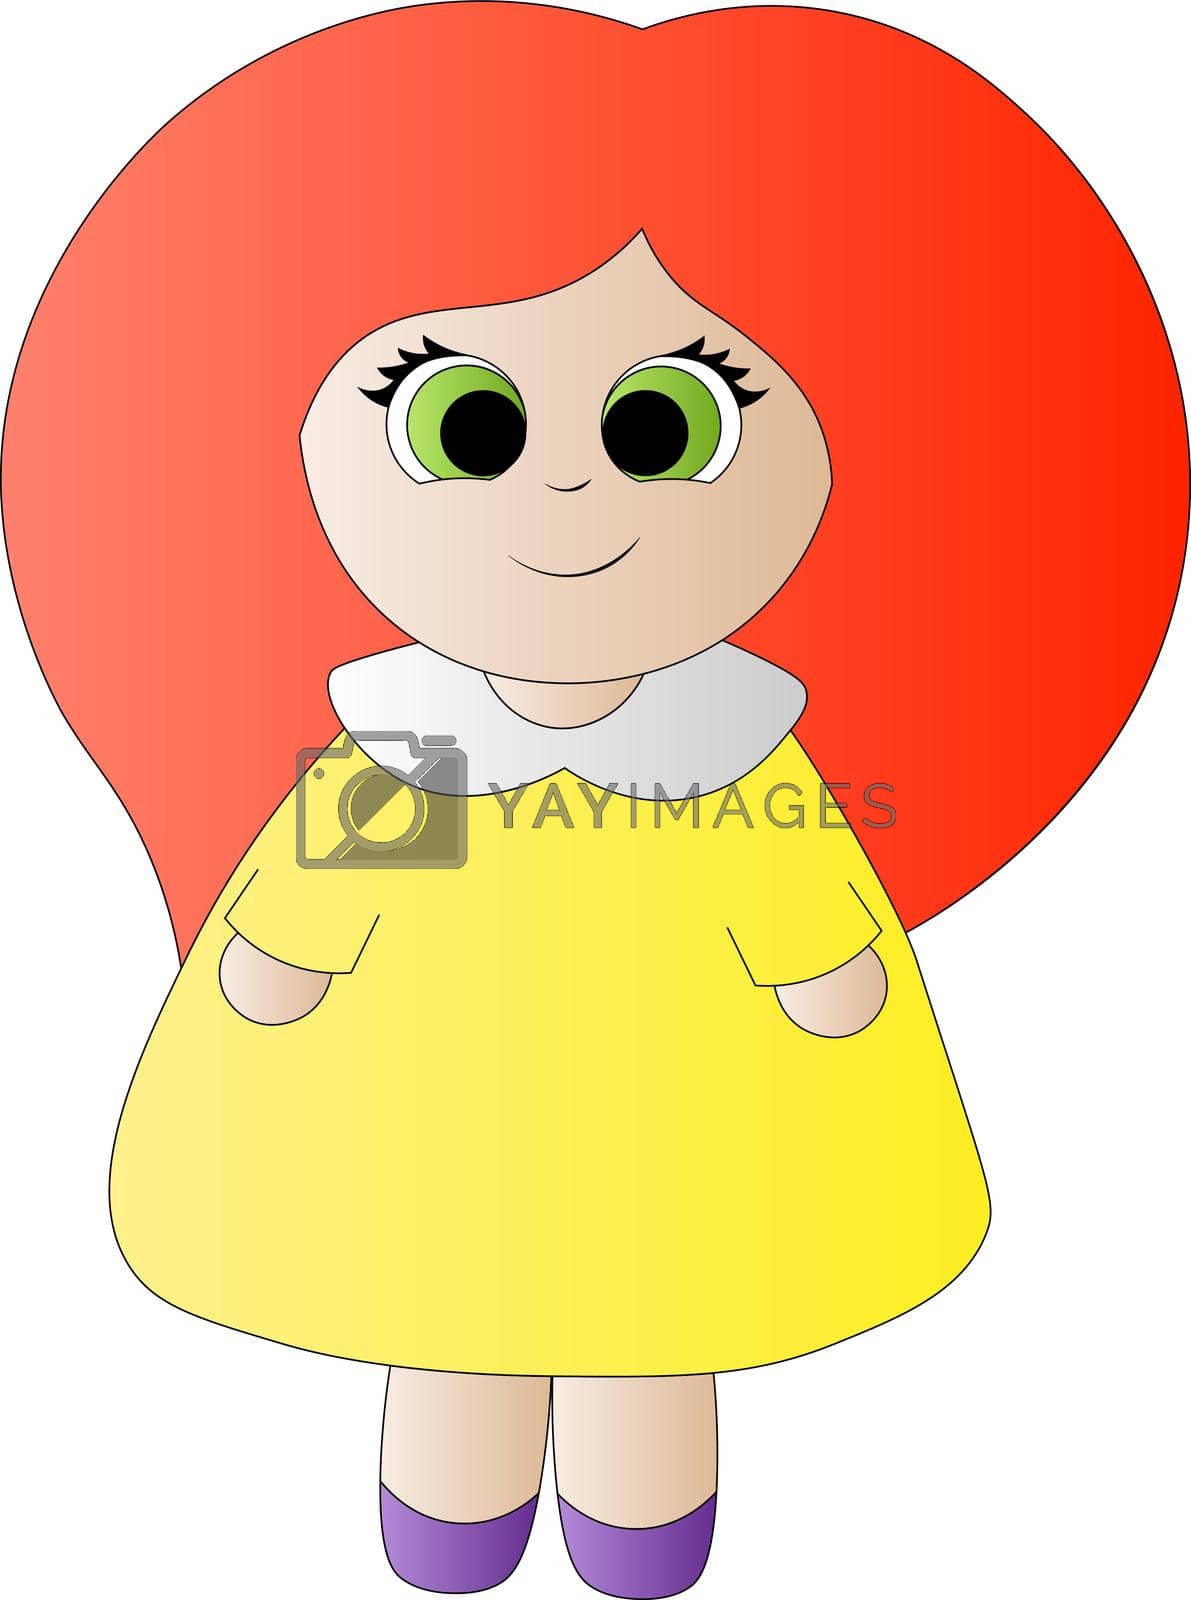 Royalty free image of Cute cartoon Girl . Draw illustration in color by AnastasiaPen